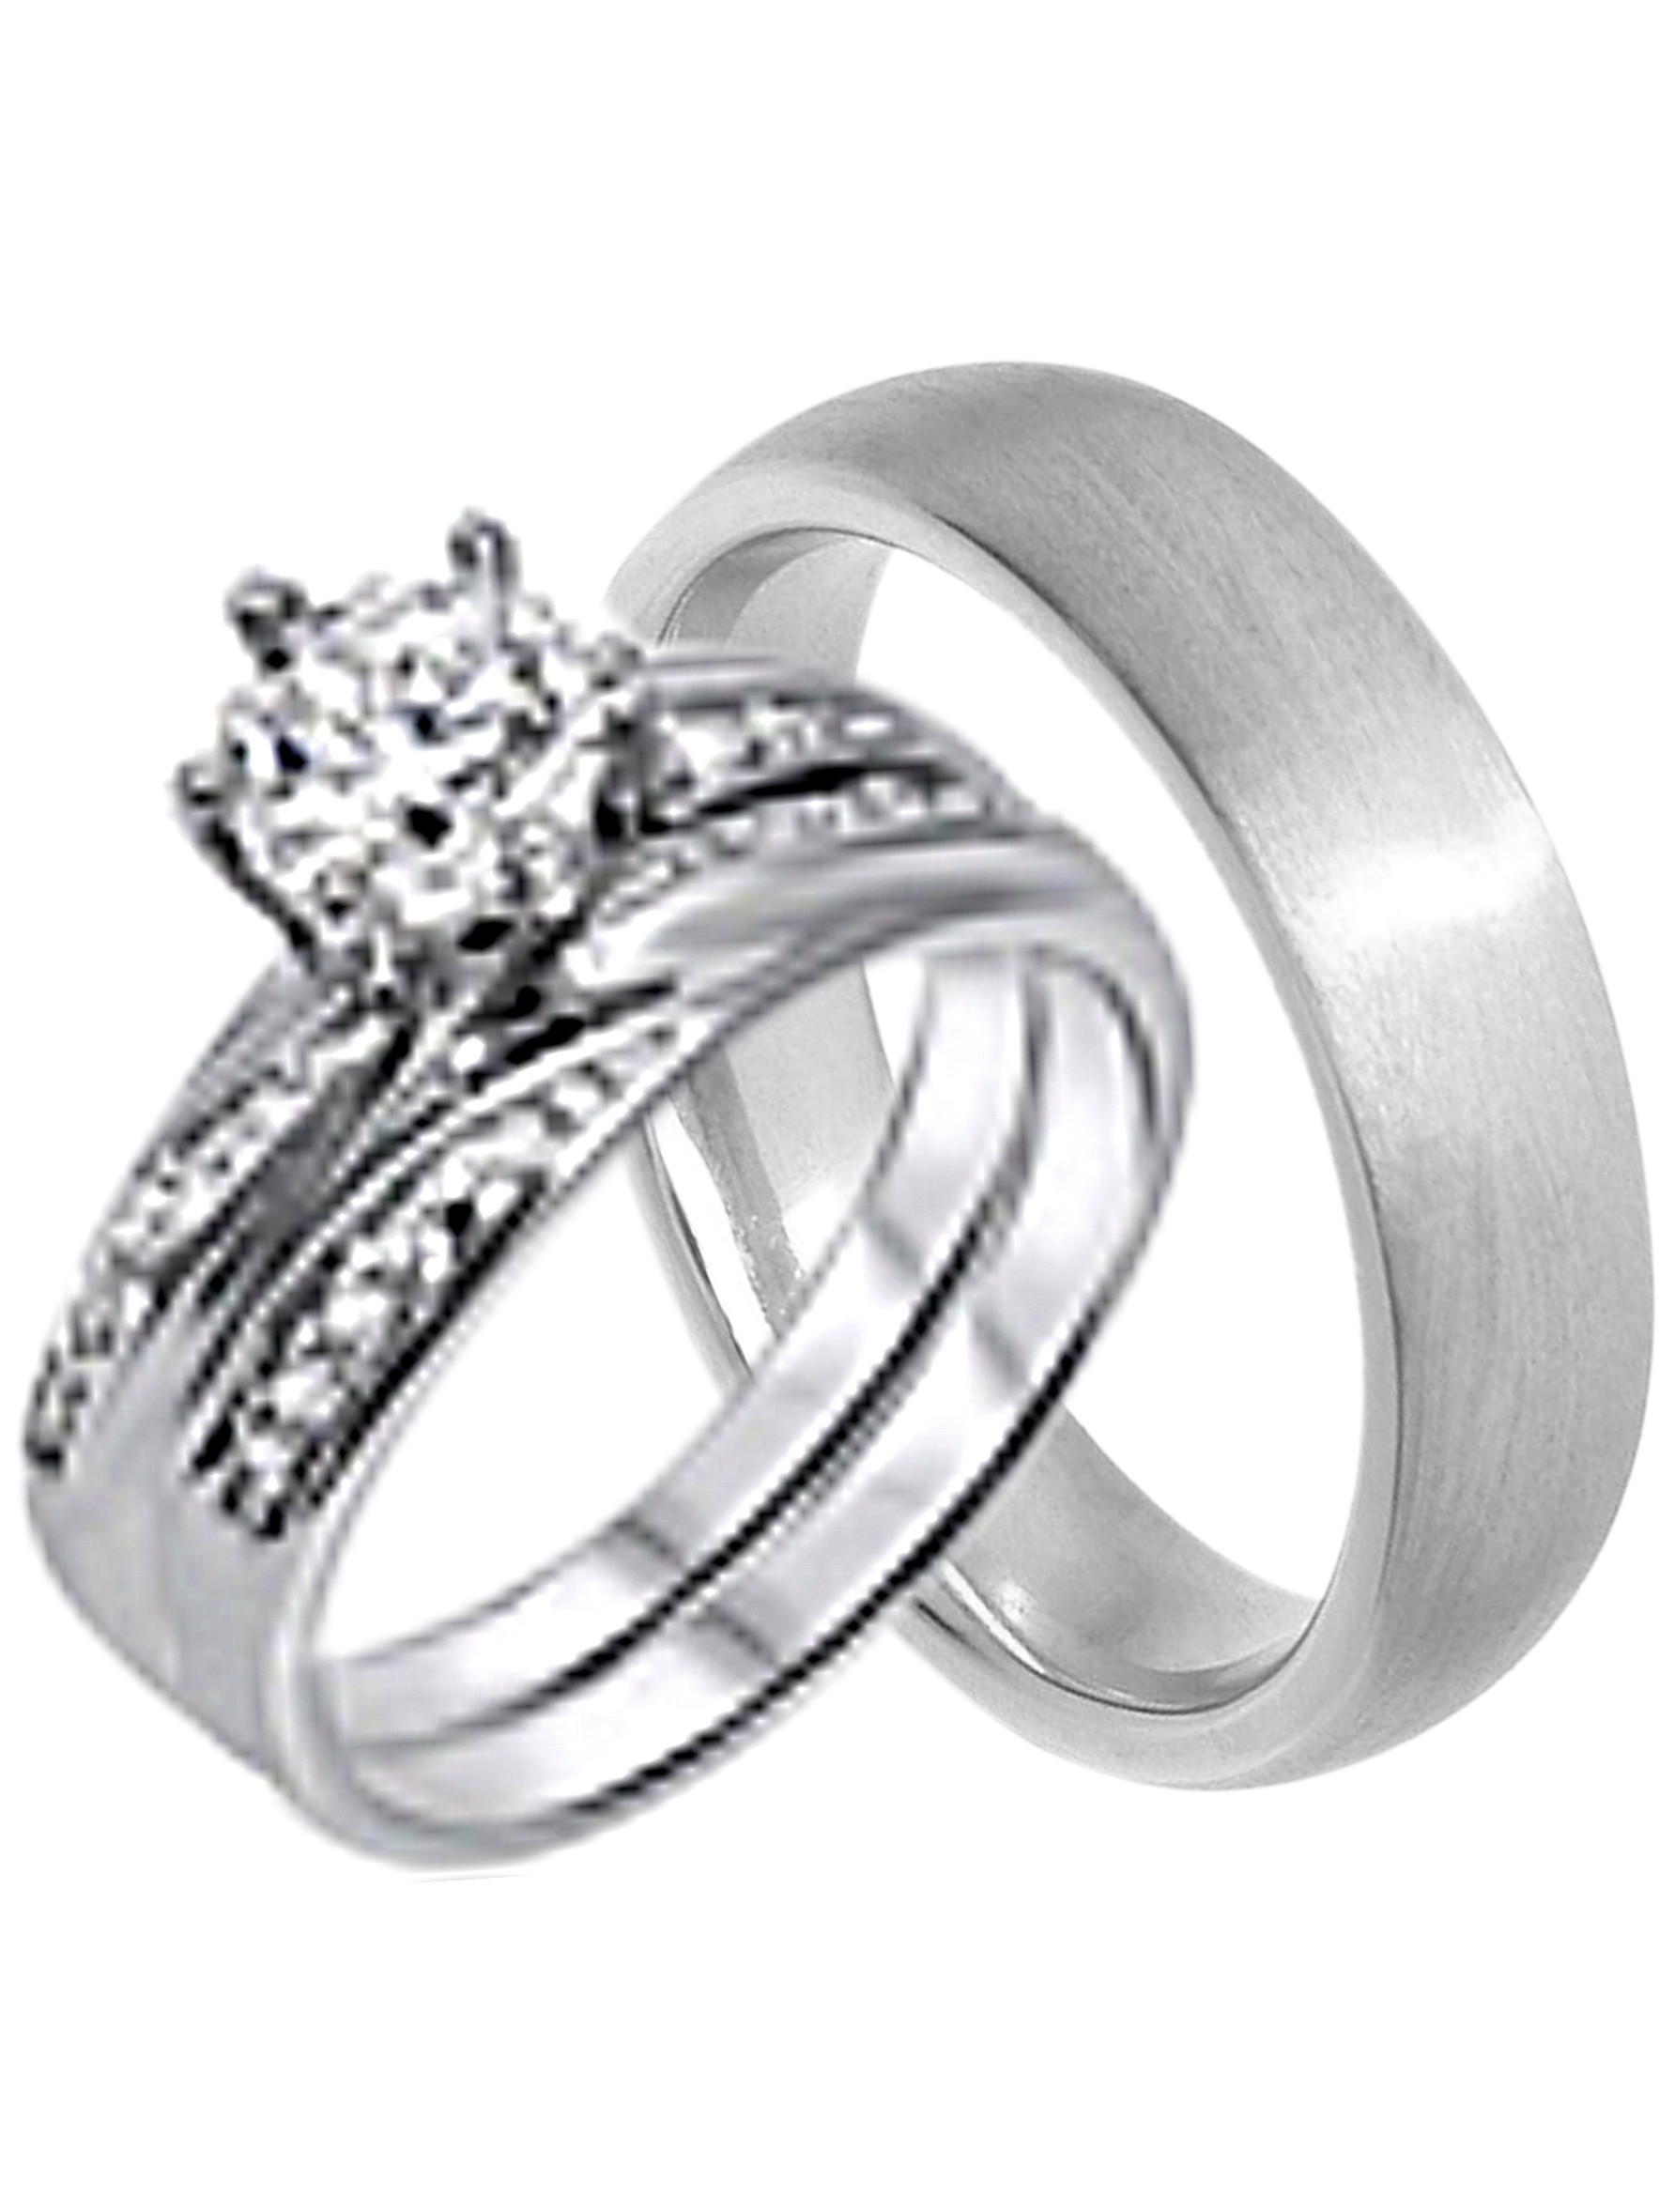 Wedding Rings Sets At Walmart
 His and Hers Wedding Ring Set Cheap Wedding Bands for Him